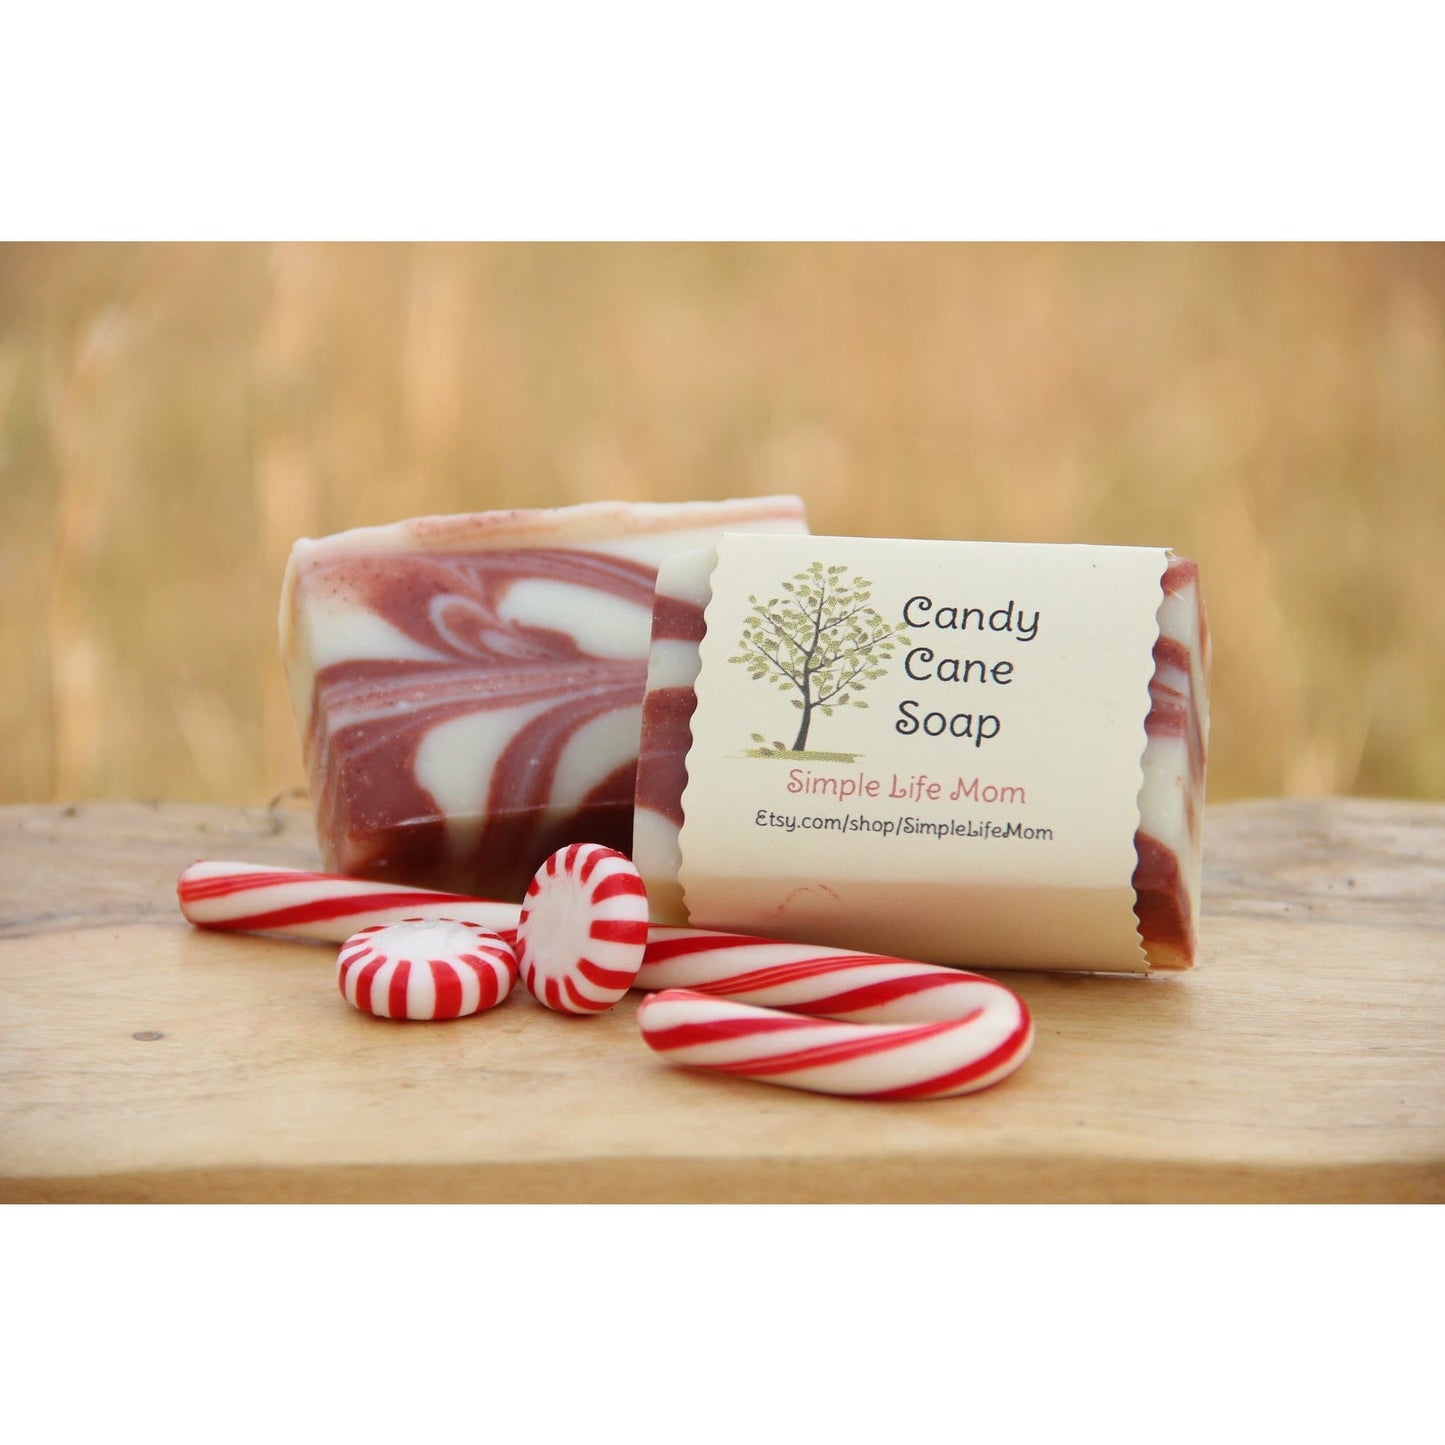 Simple Life Mom - Candy Cane Soap 4oz.